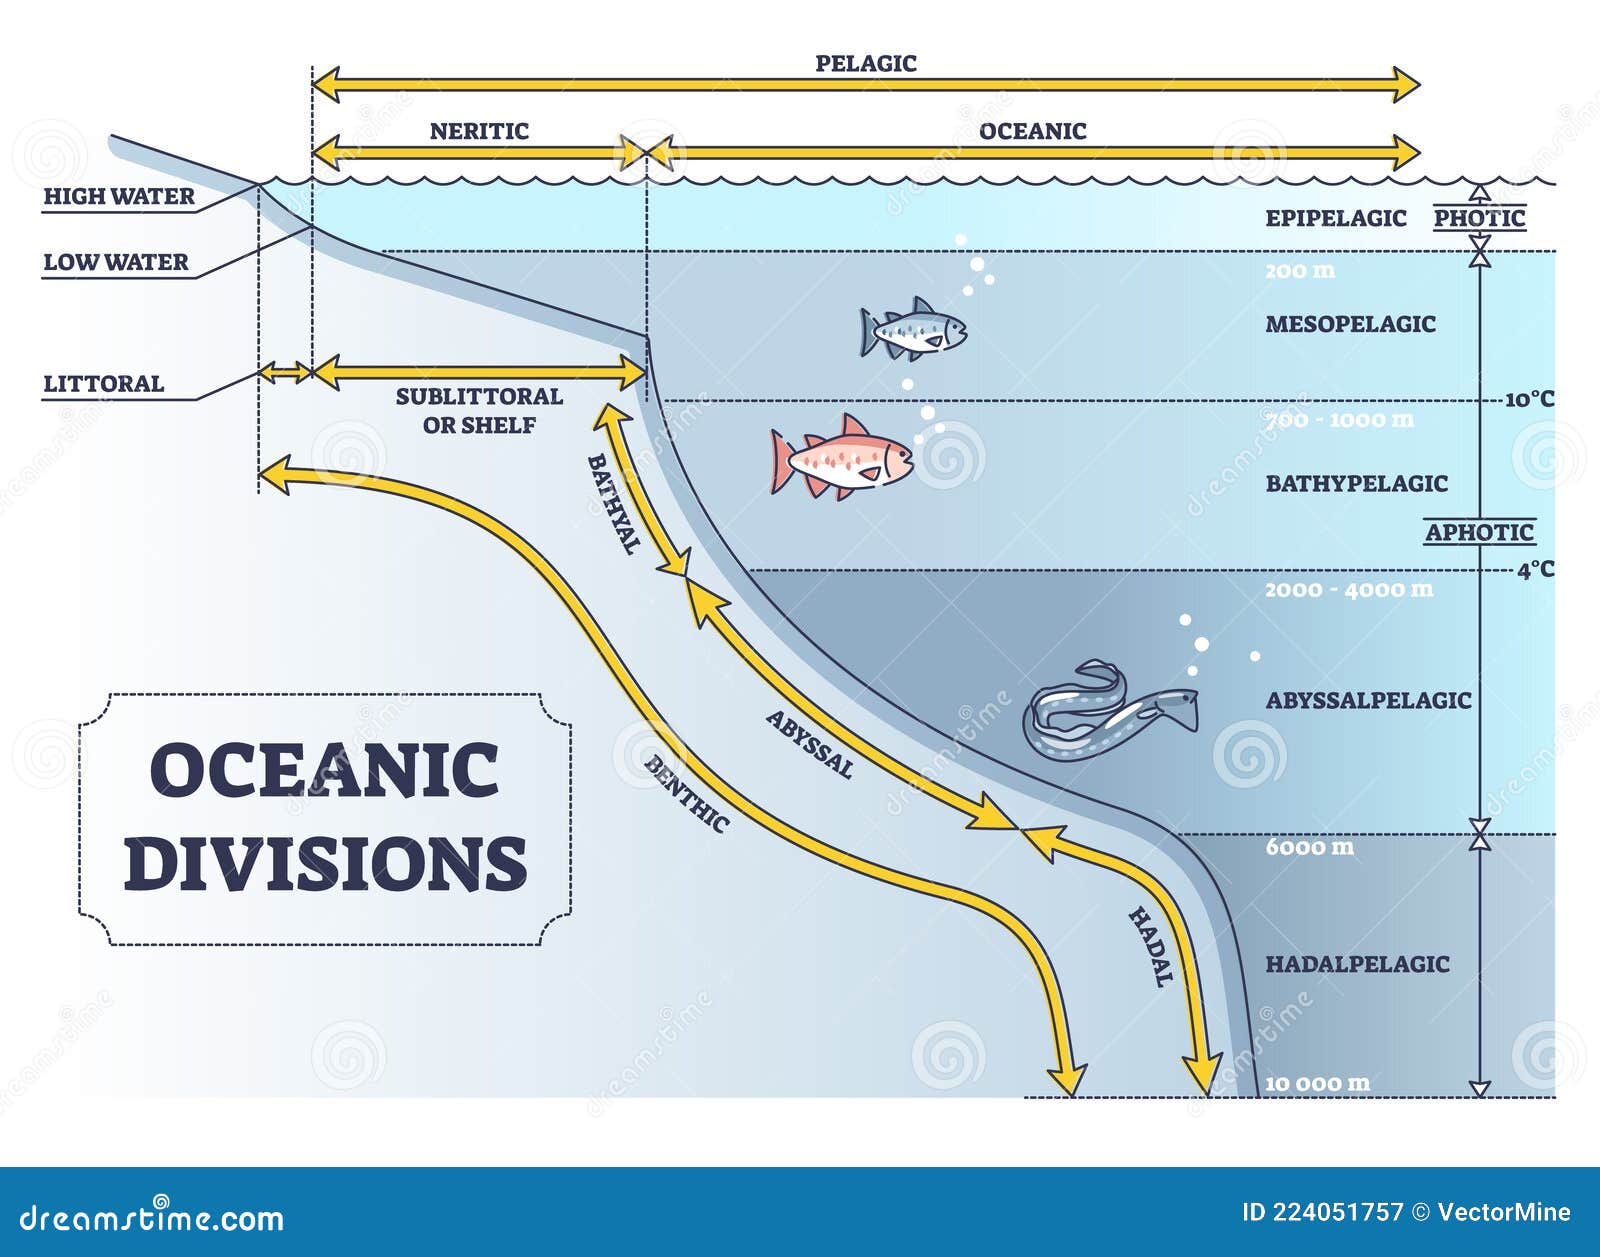 oceanic divisions and depth zones as underwater parts in outline diagram